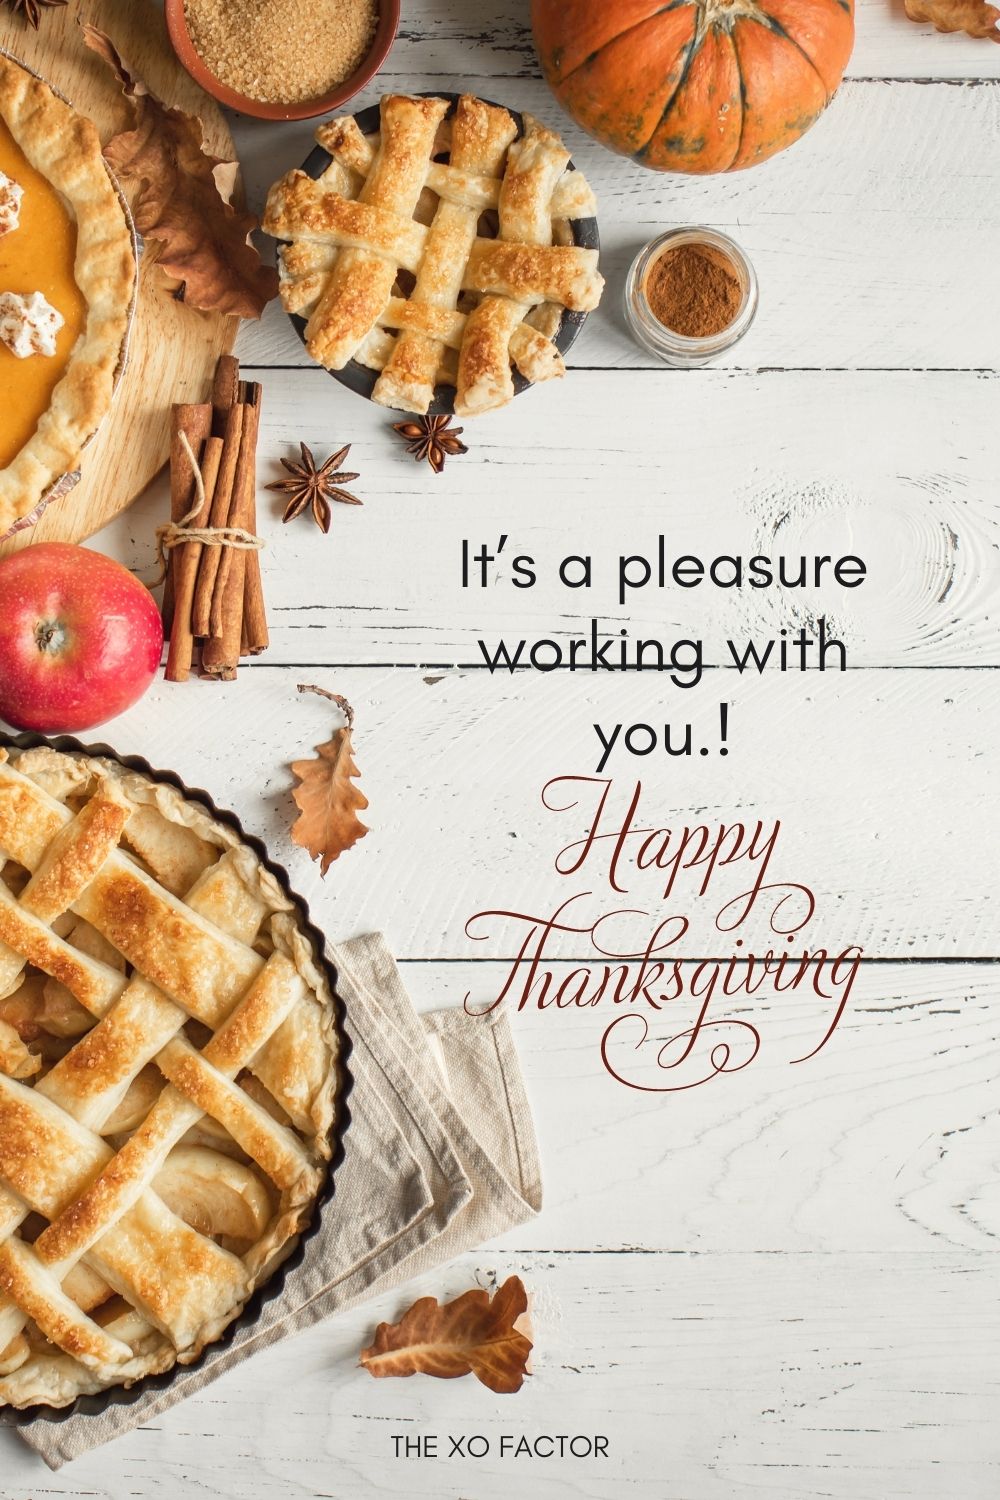 It’s a pleasure working with you. Happy Thanksgiving!